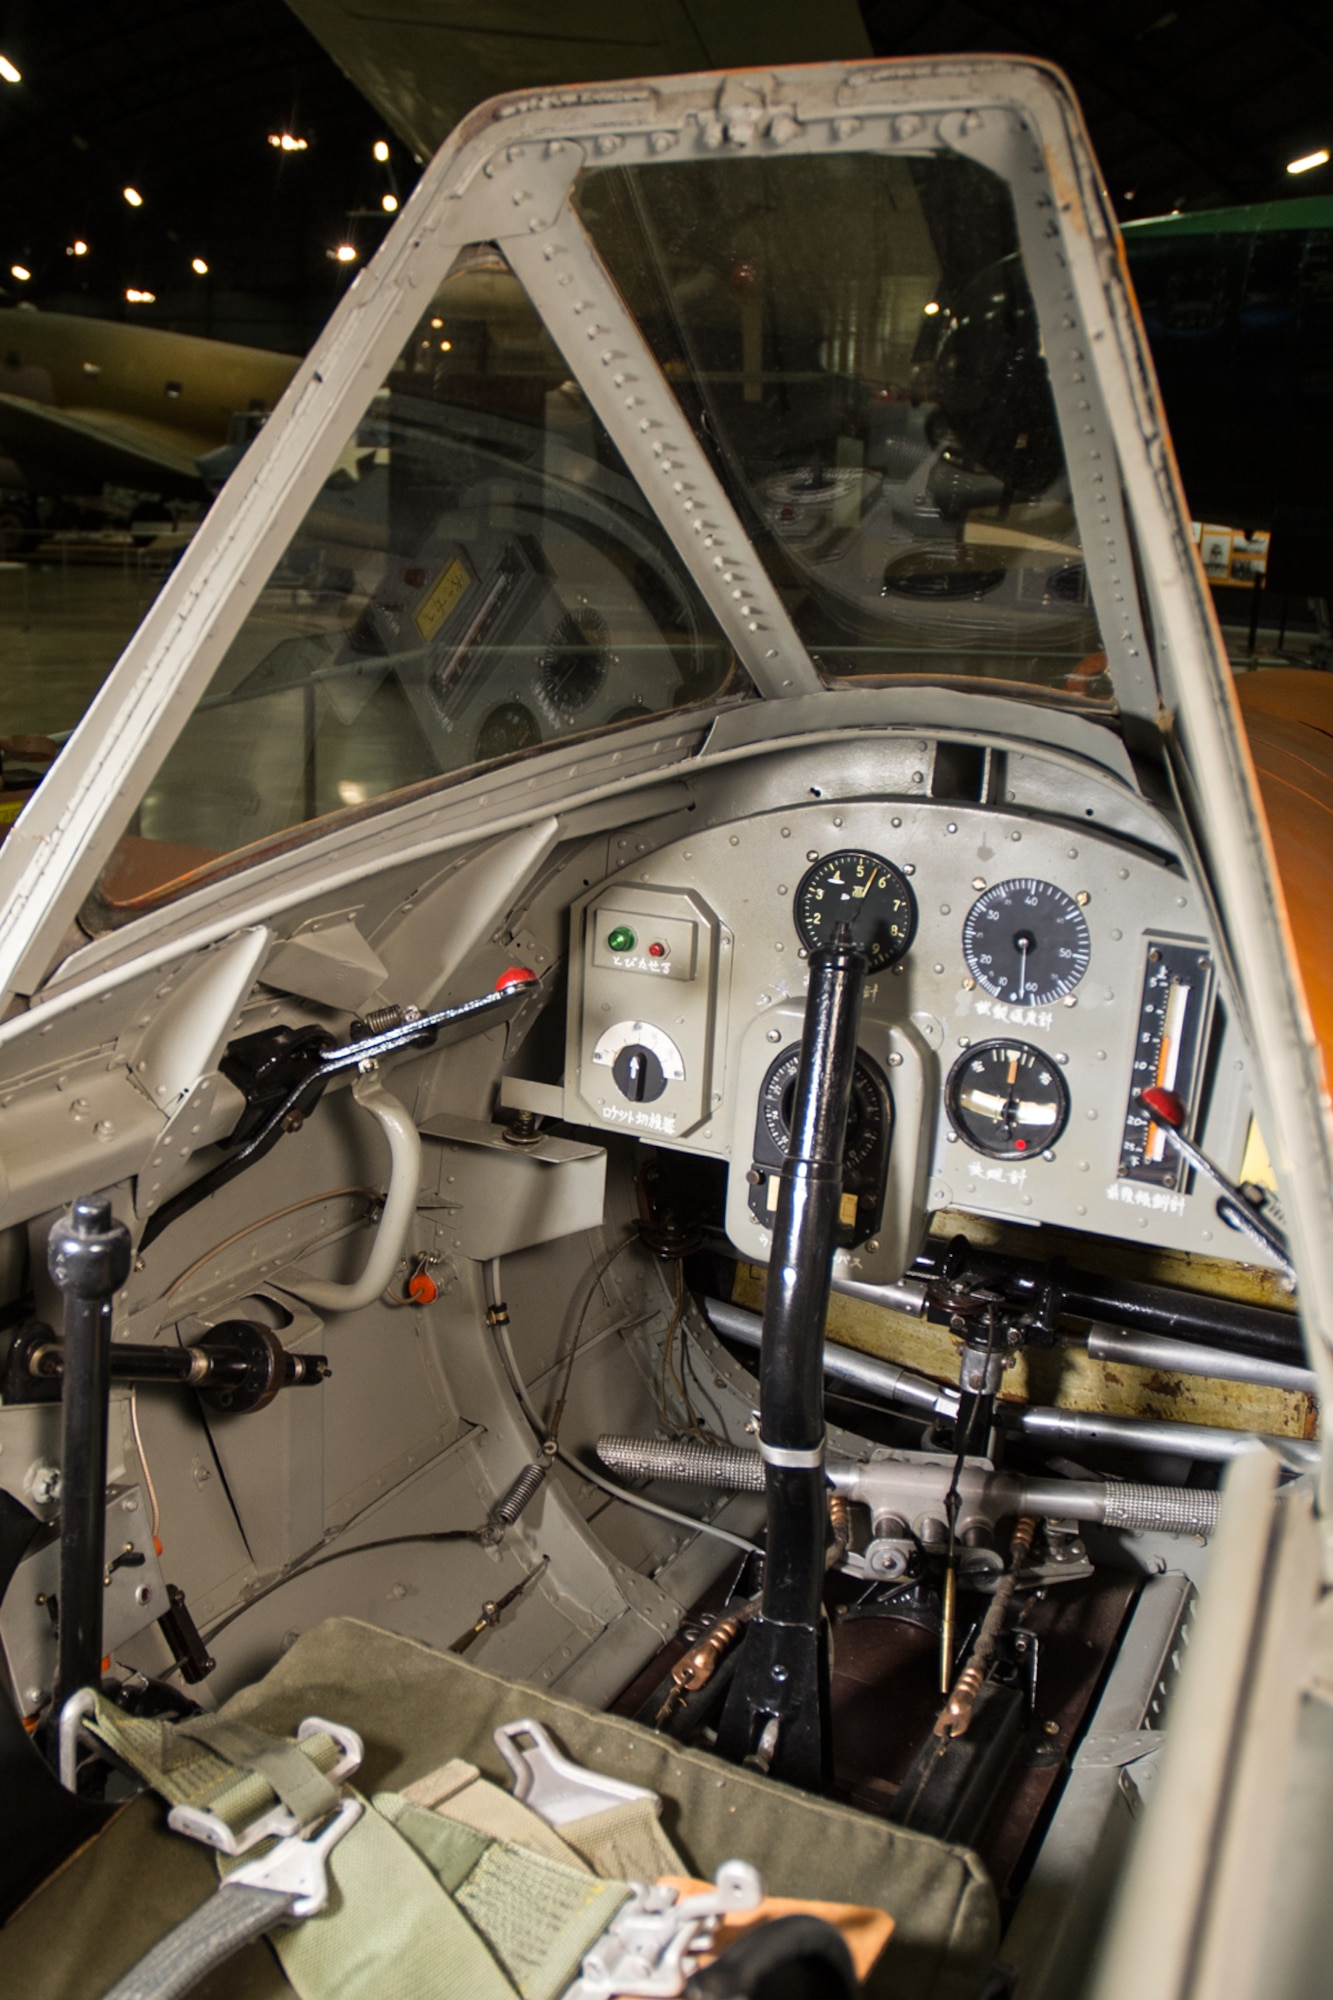 Yokosuka MXY7-K1 Ohka Trainer cockpit in the World War II Gallery at the National Museum of the United States Air Force. (U.S. Air Force photo by Ken LaRock)